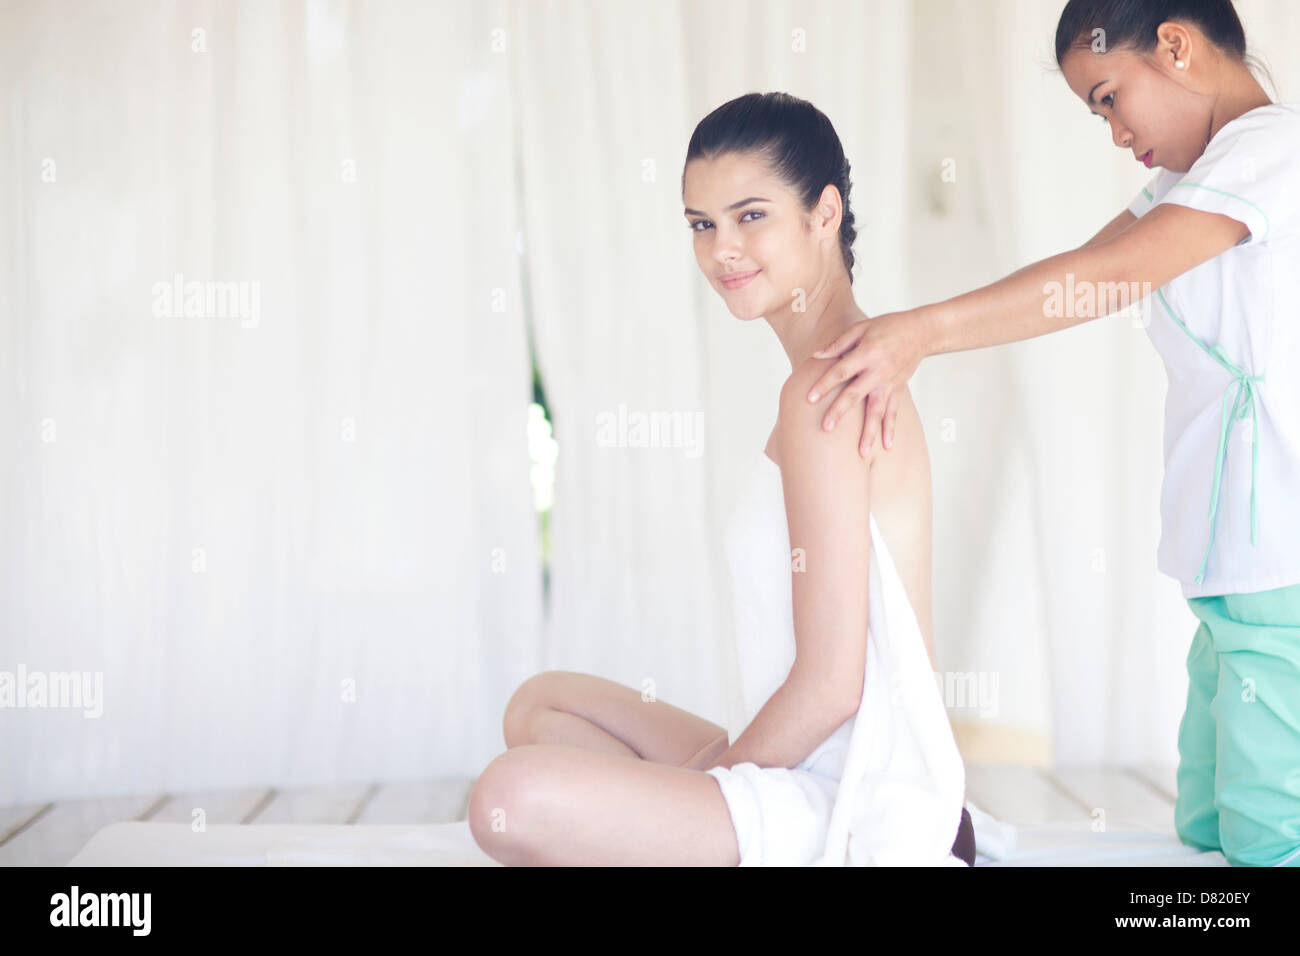 young woman sptreatment. Stock Photo